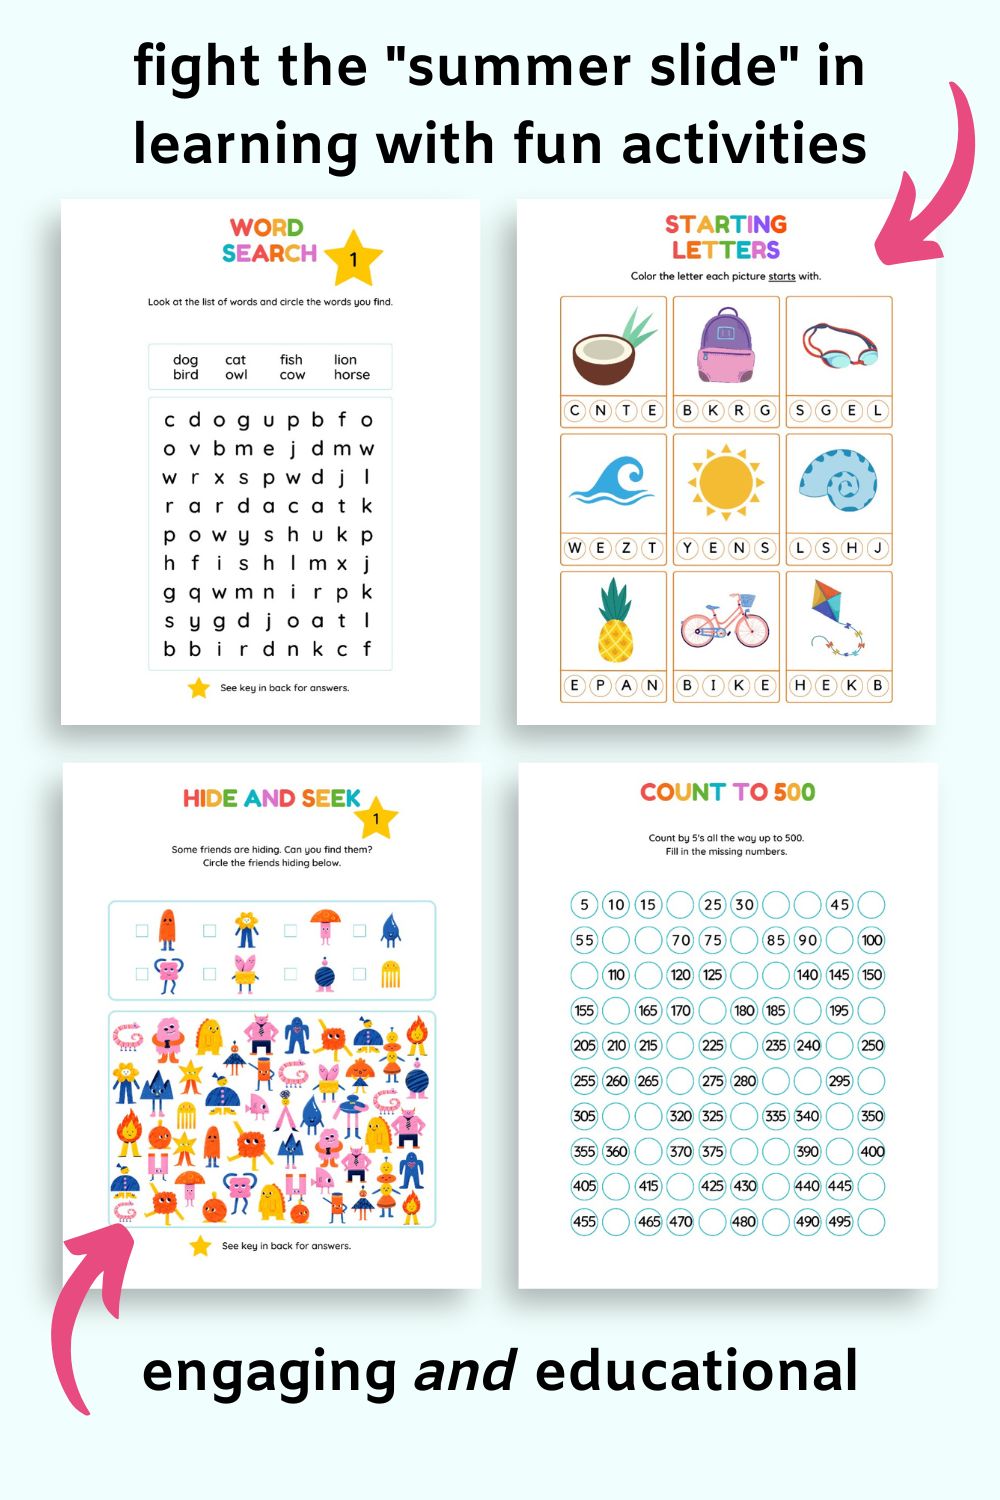 Four activity pages for kids: a word search, starting letter find, I spy, and skip counting to 500